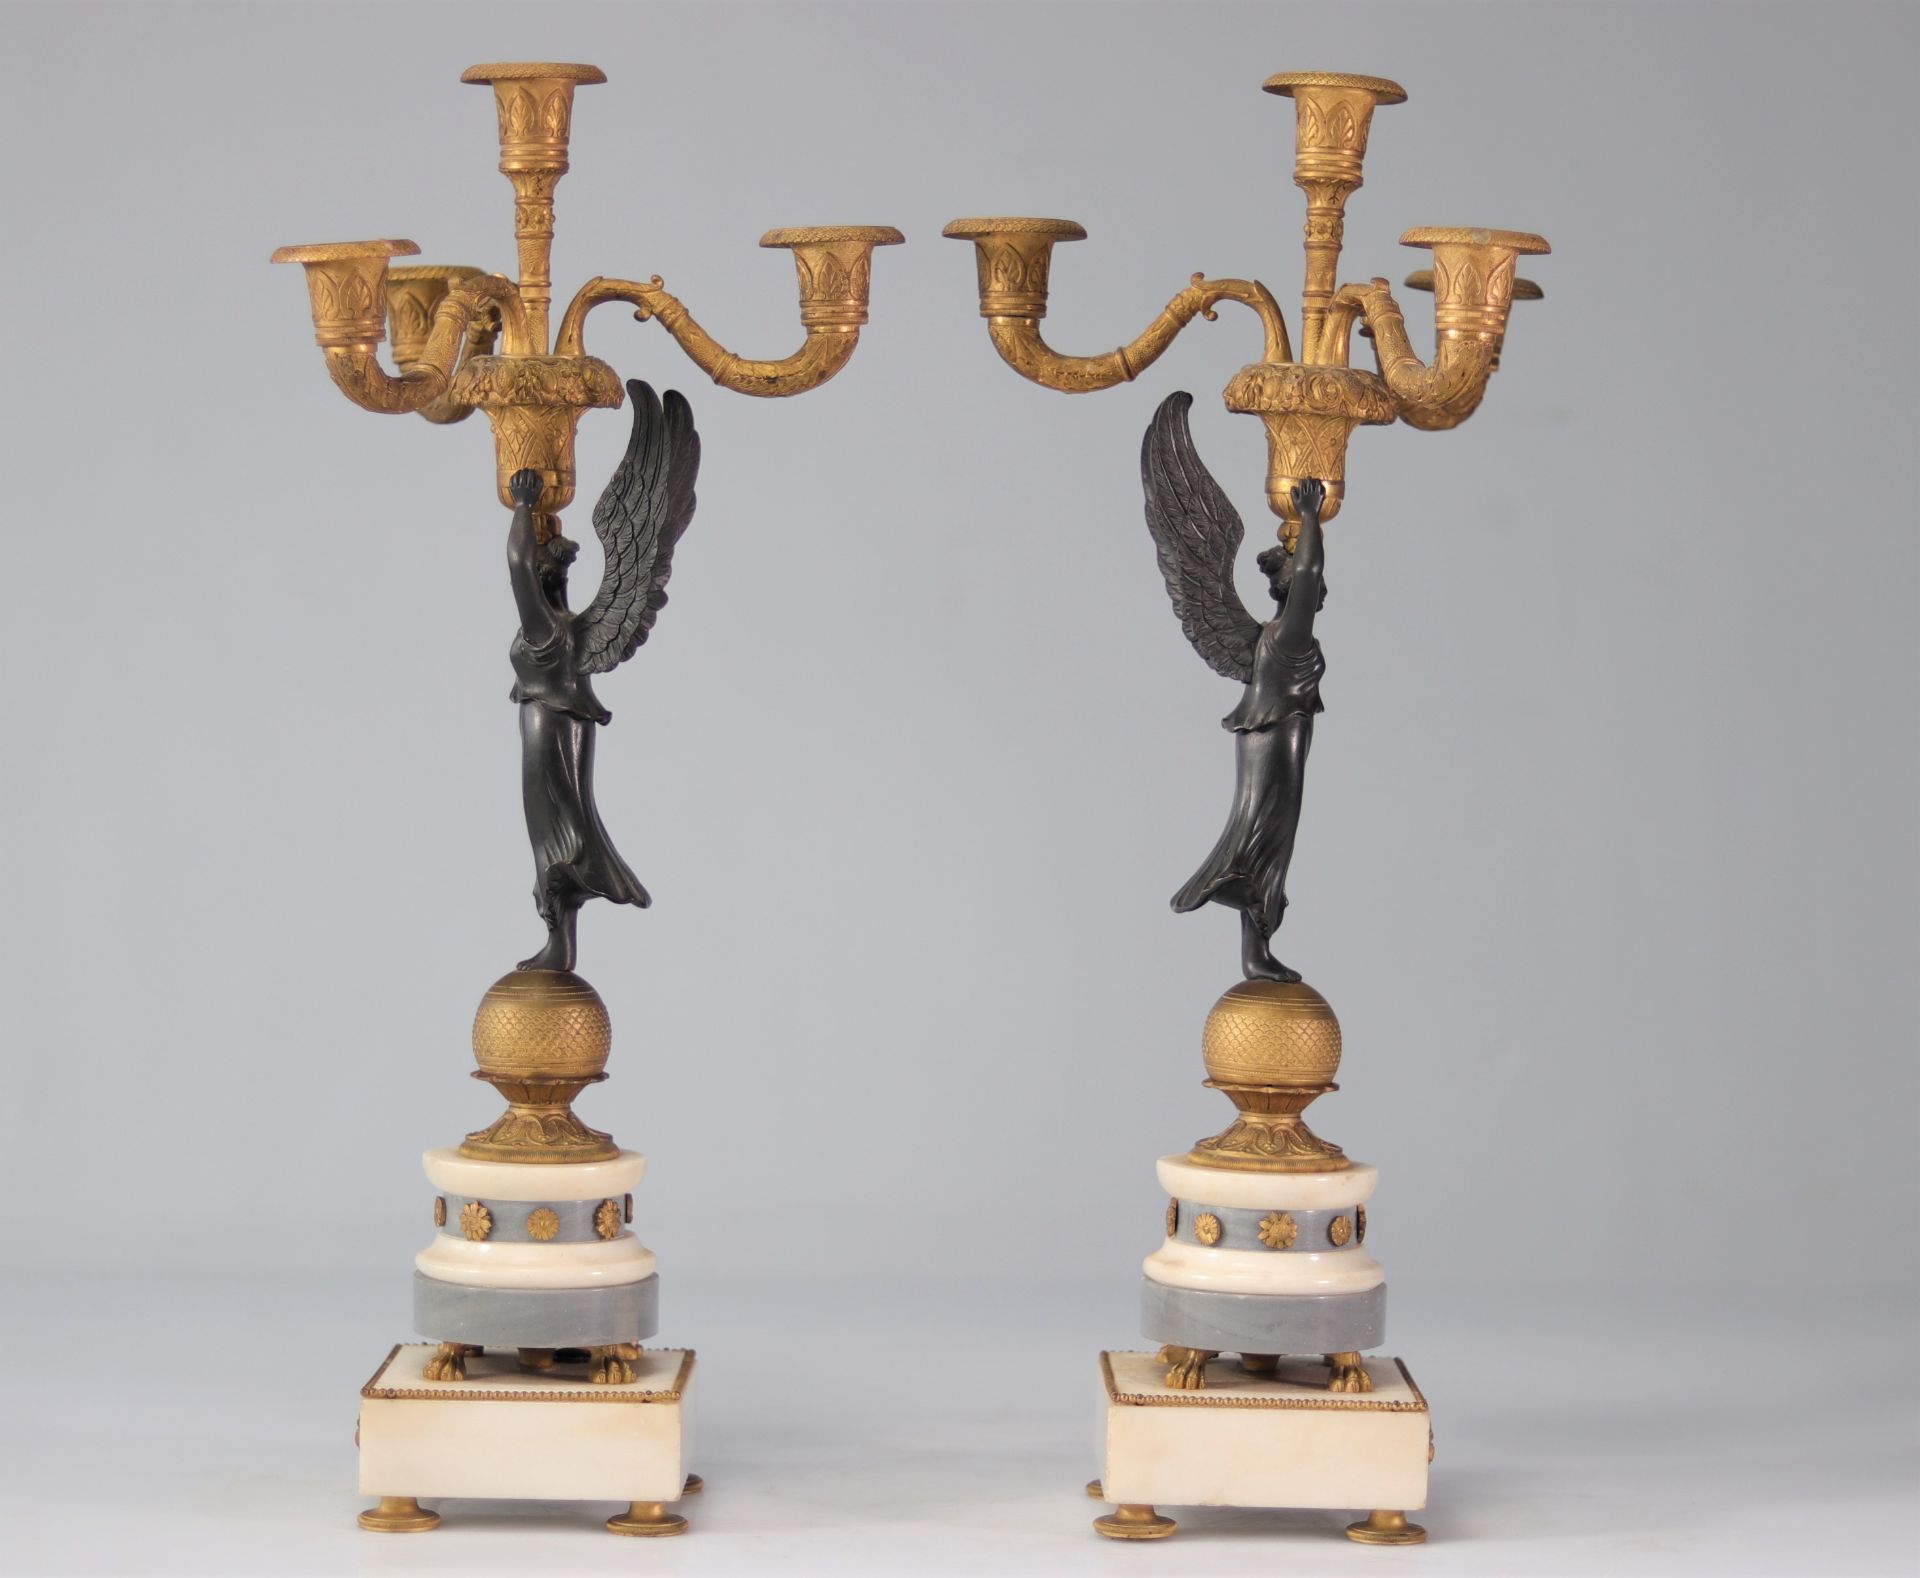 Pair of Empire candlesticks "winged women carrying fruit baskets" - Image 3 of 5